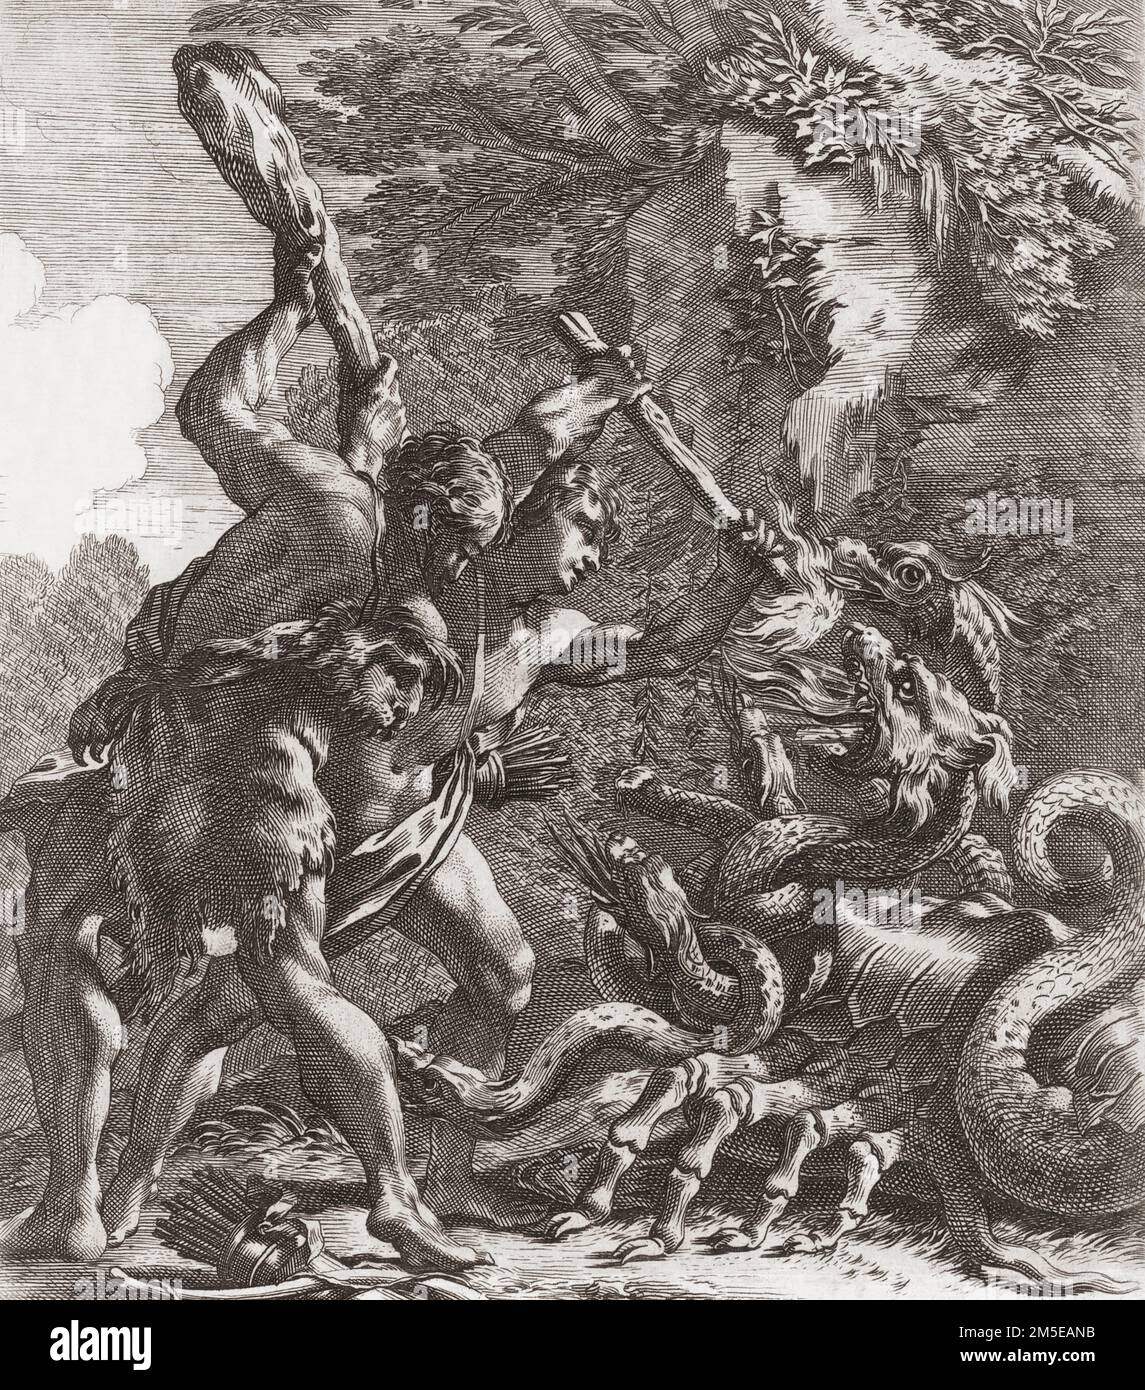 Hercules kills  the Hydra, the second of Hercules' twelve labours.  Hercules' nephew Iolaus is doing battle with him against the monster.  From a print by Michel Dorigny after the painting by Simon Vouet. Stock Photo